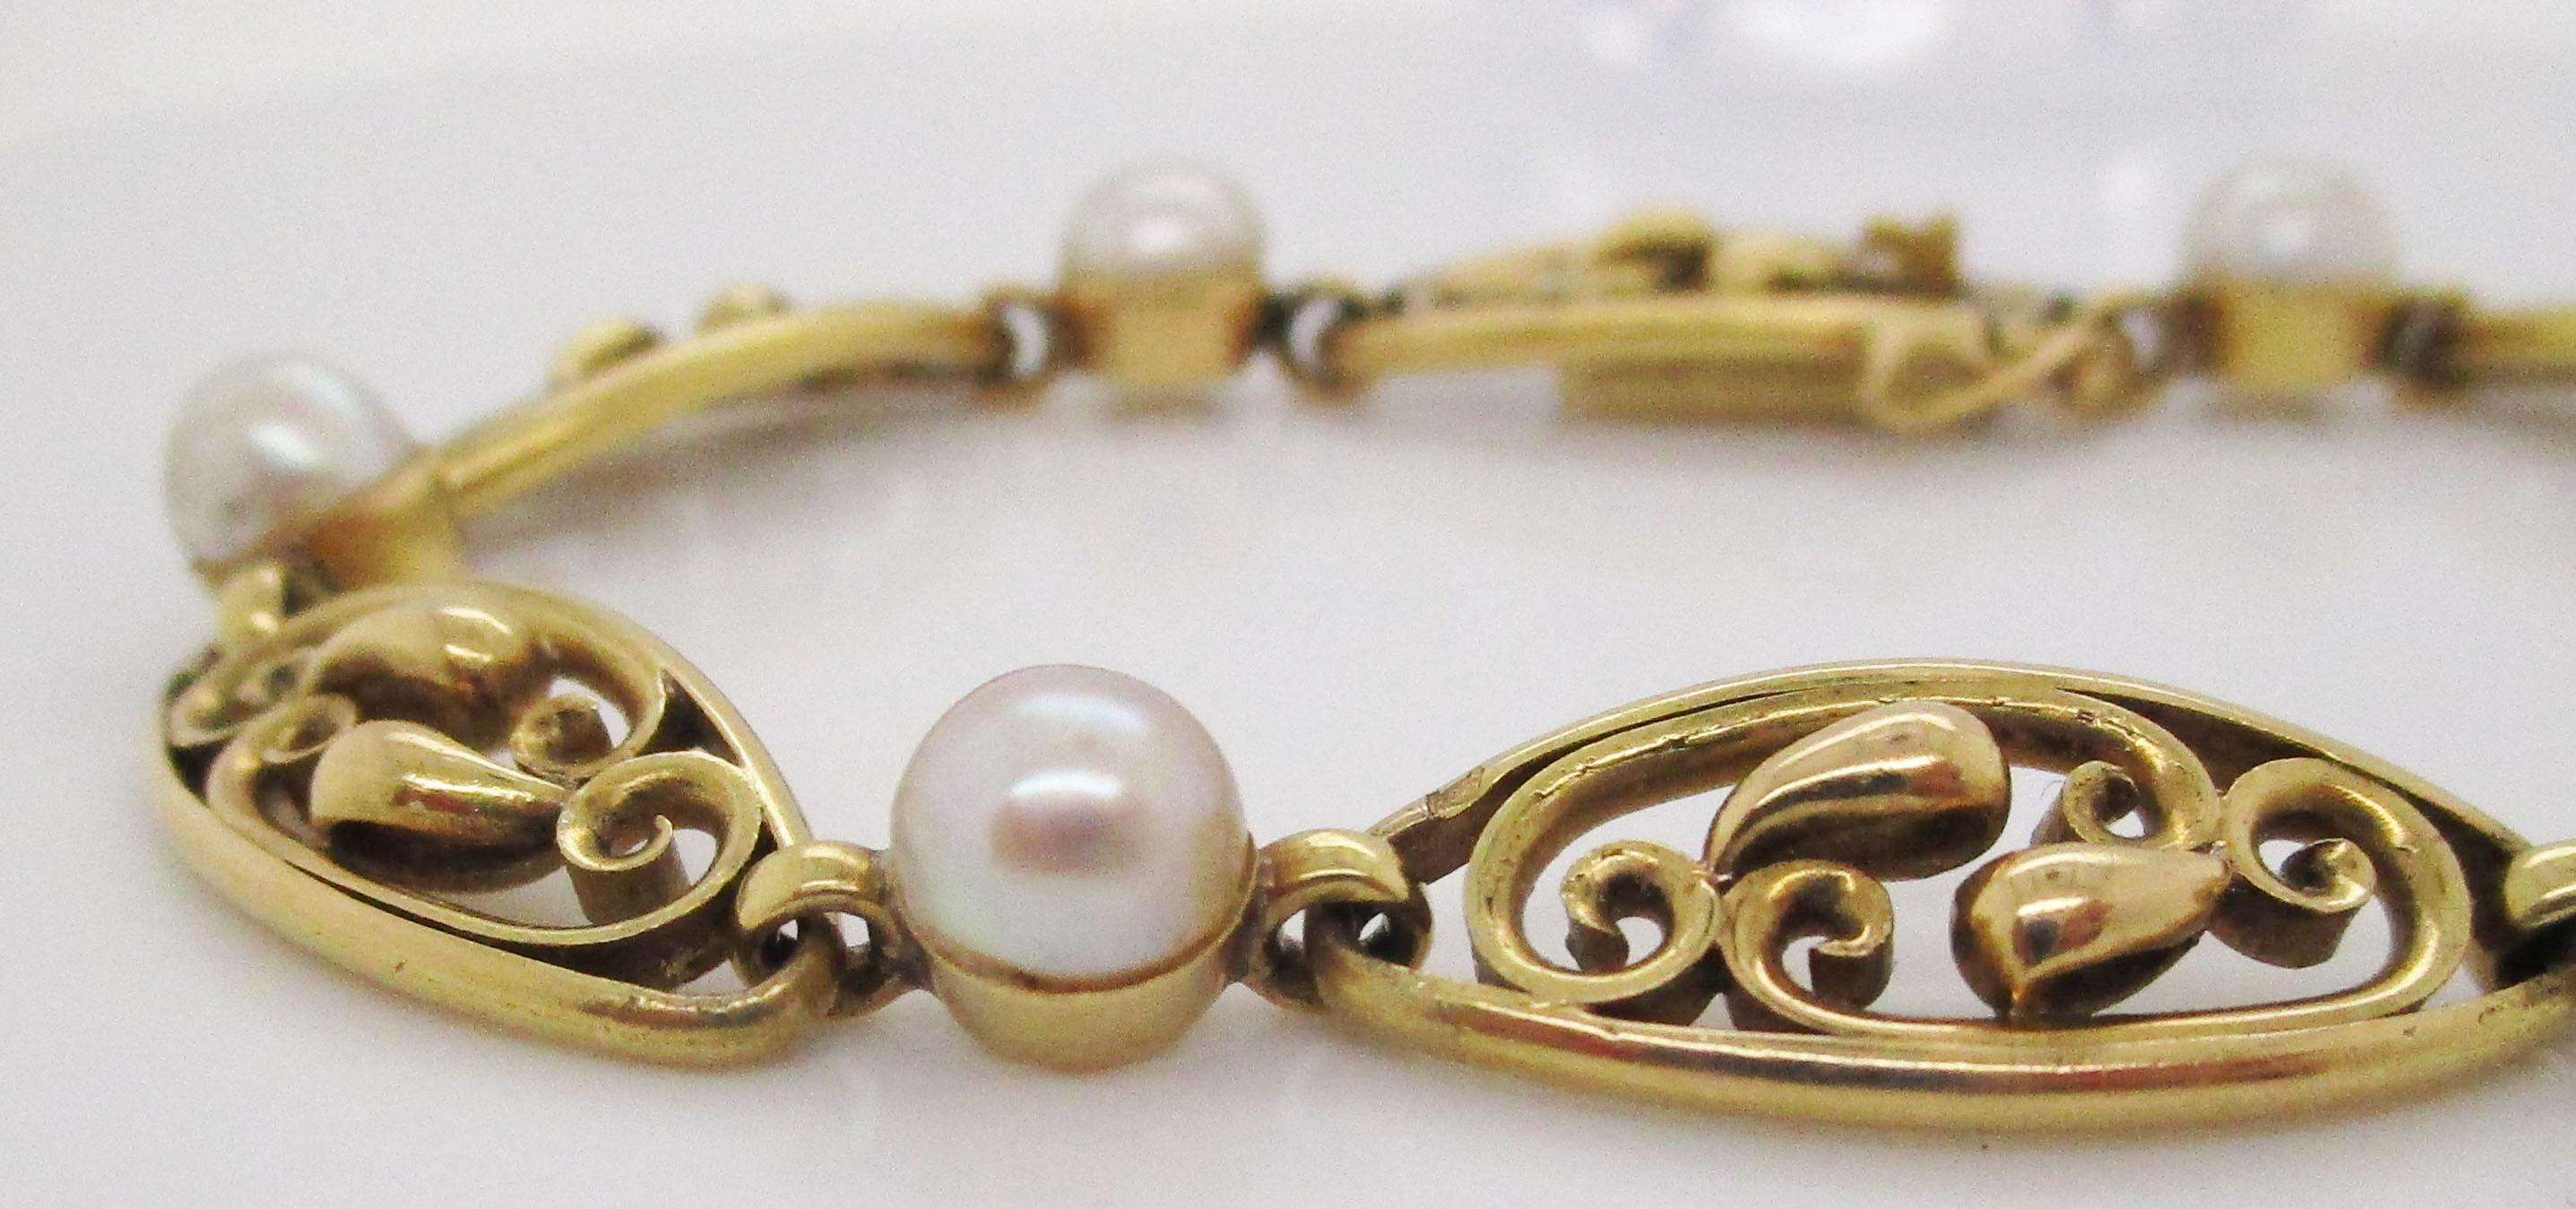 This lovely bracelet features a sophisticated combination of rich 18k yellow gold and GIA-certified natural pearls in an open, delicate 1890s style that is pure Art Nouveau beauty! The links of the bracelet have a delicate design that showcases the